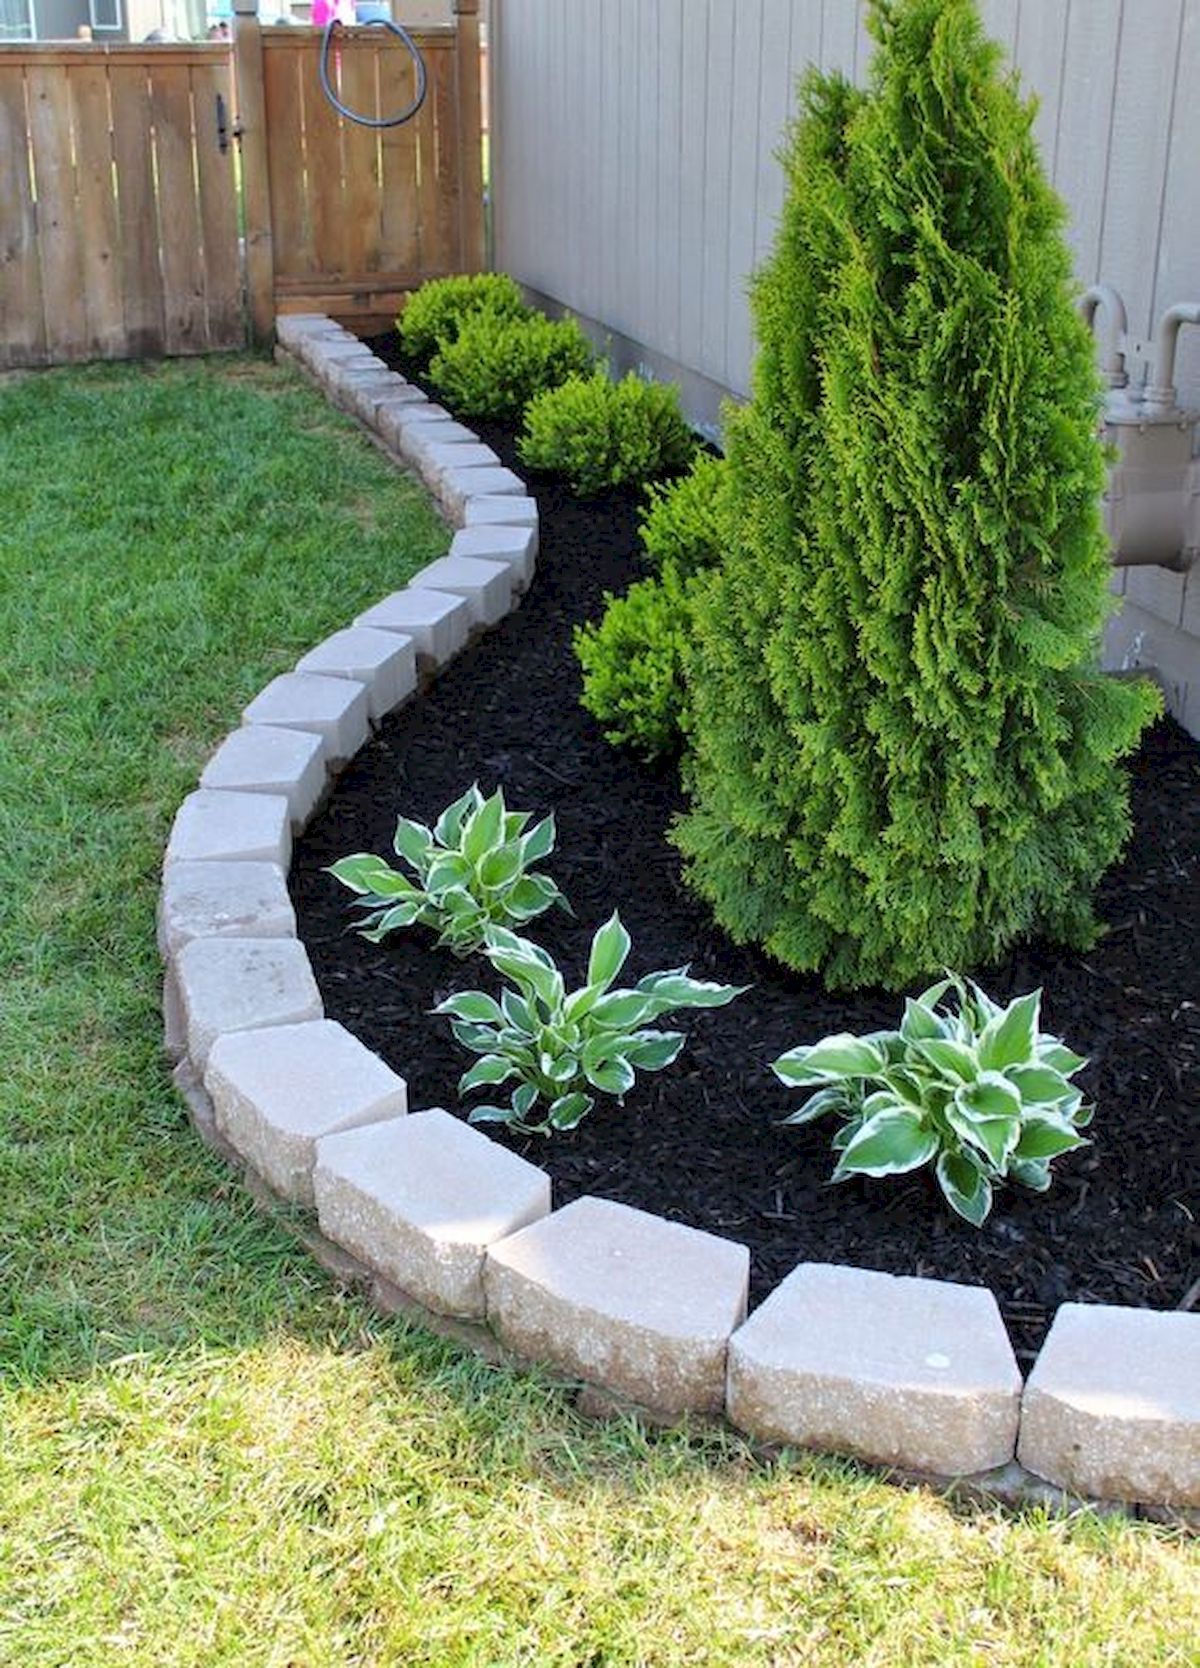 90 Simple and Beautiful Front Yard Landscaping Ideas on A Budget - LivingMarch.com